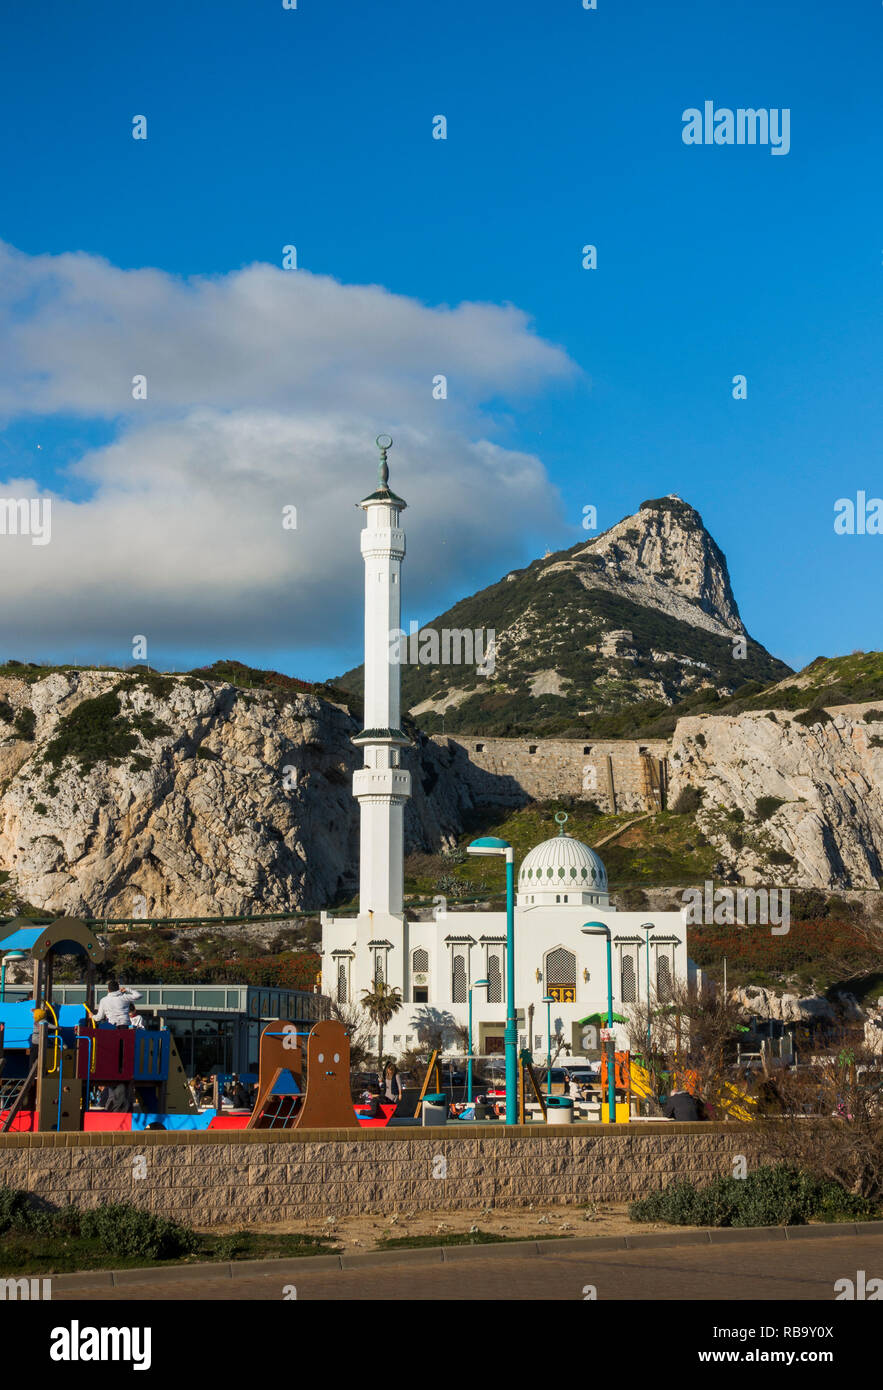 Ibrahim-al-Ibrahim Mosque at Europe point in Gibraltar, overseas british territory a gift from King Fahd, Rock of Gibraltar, UK, Europe. Stock Photo